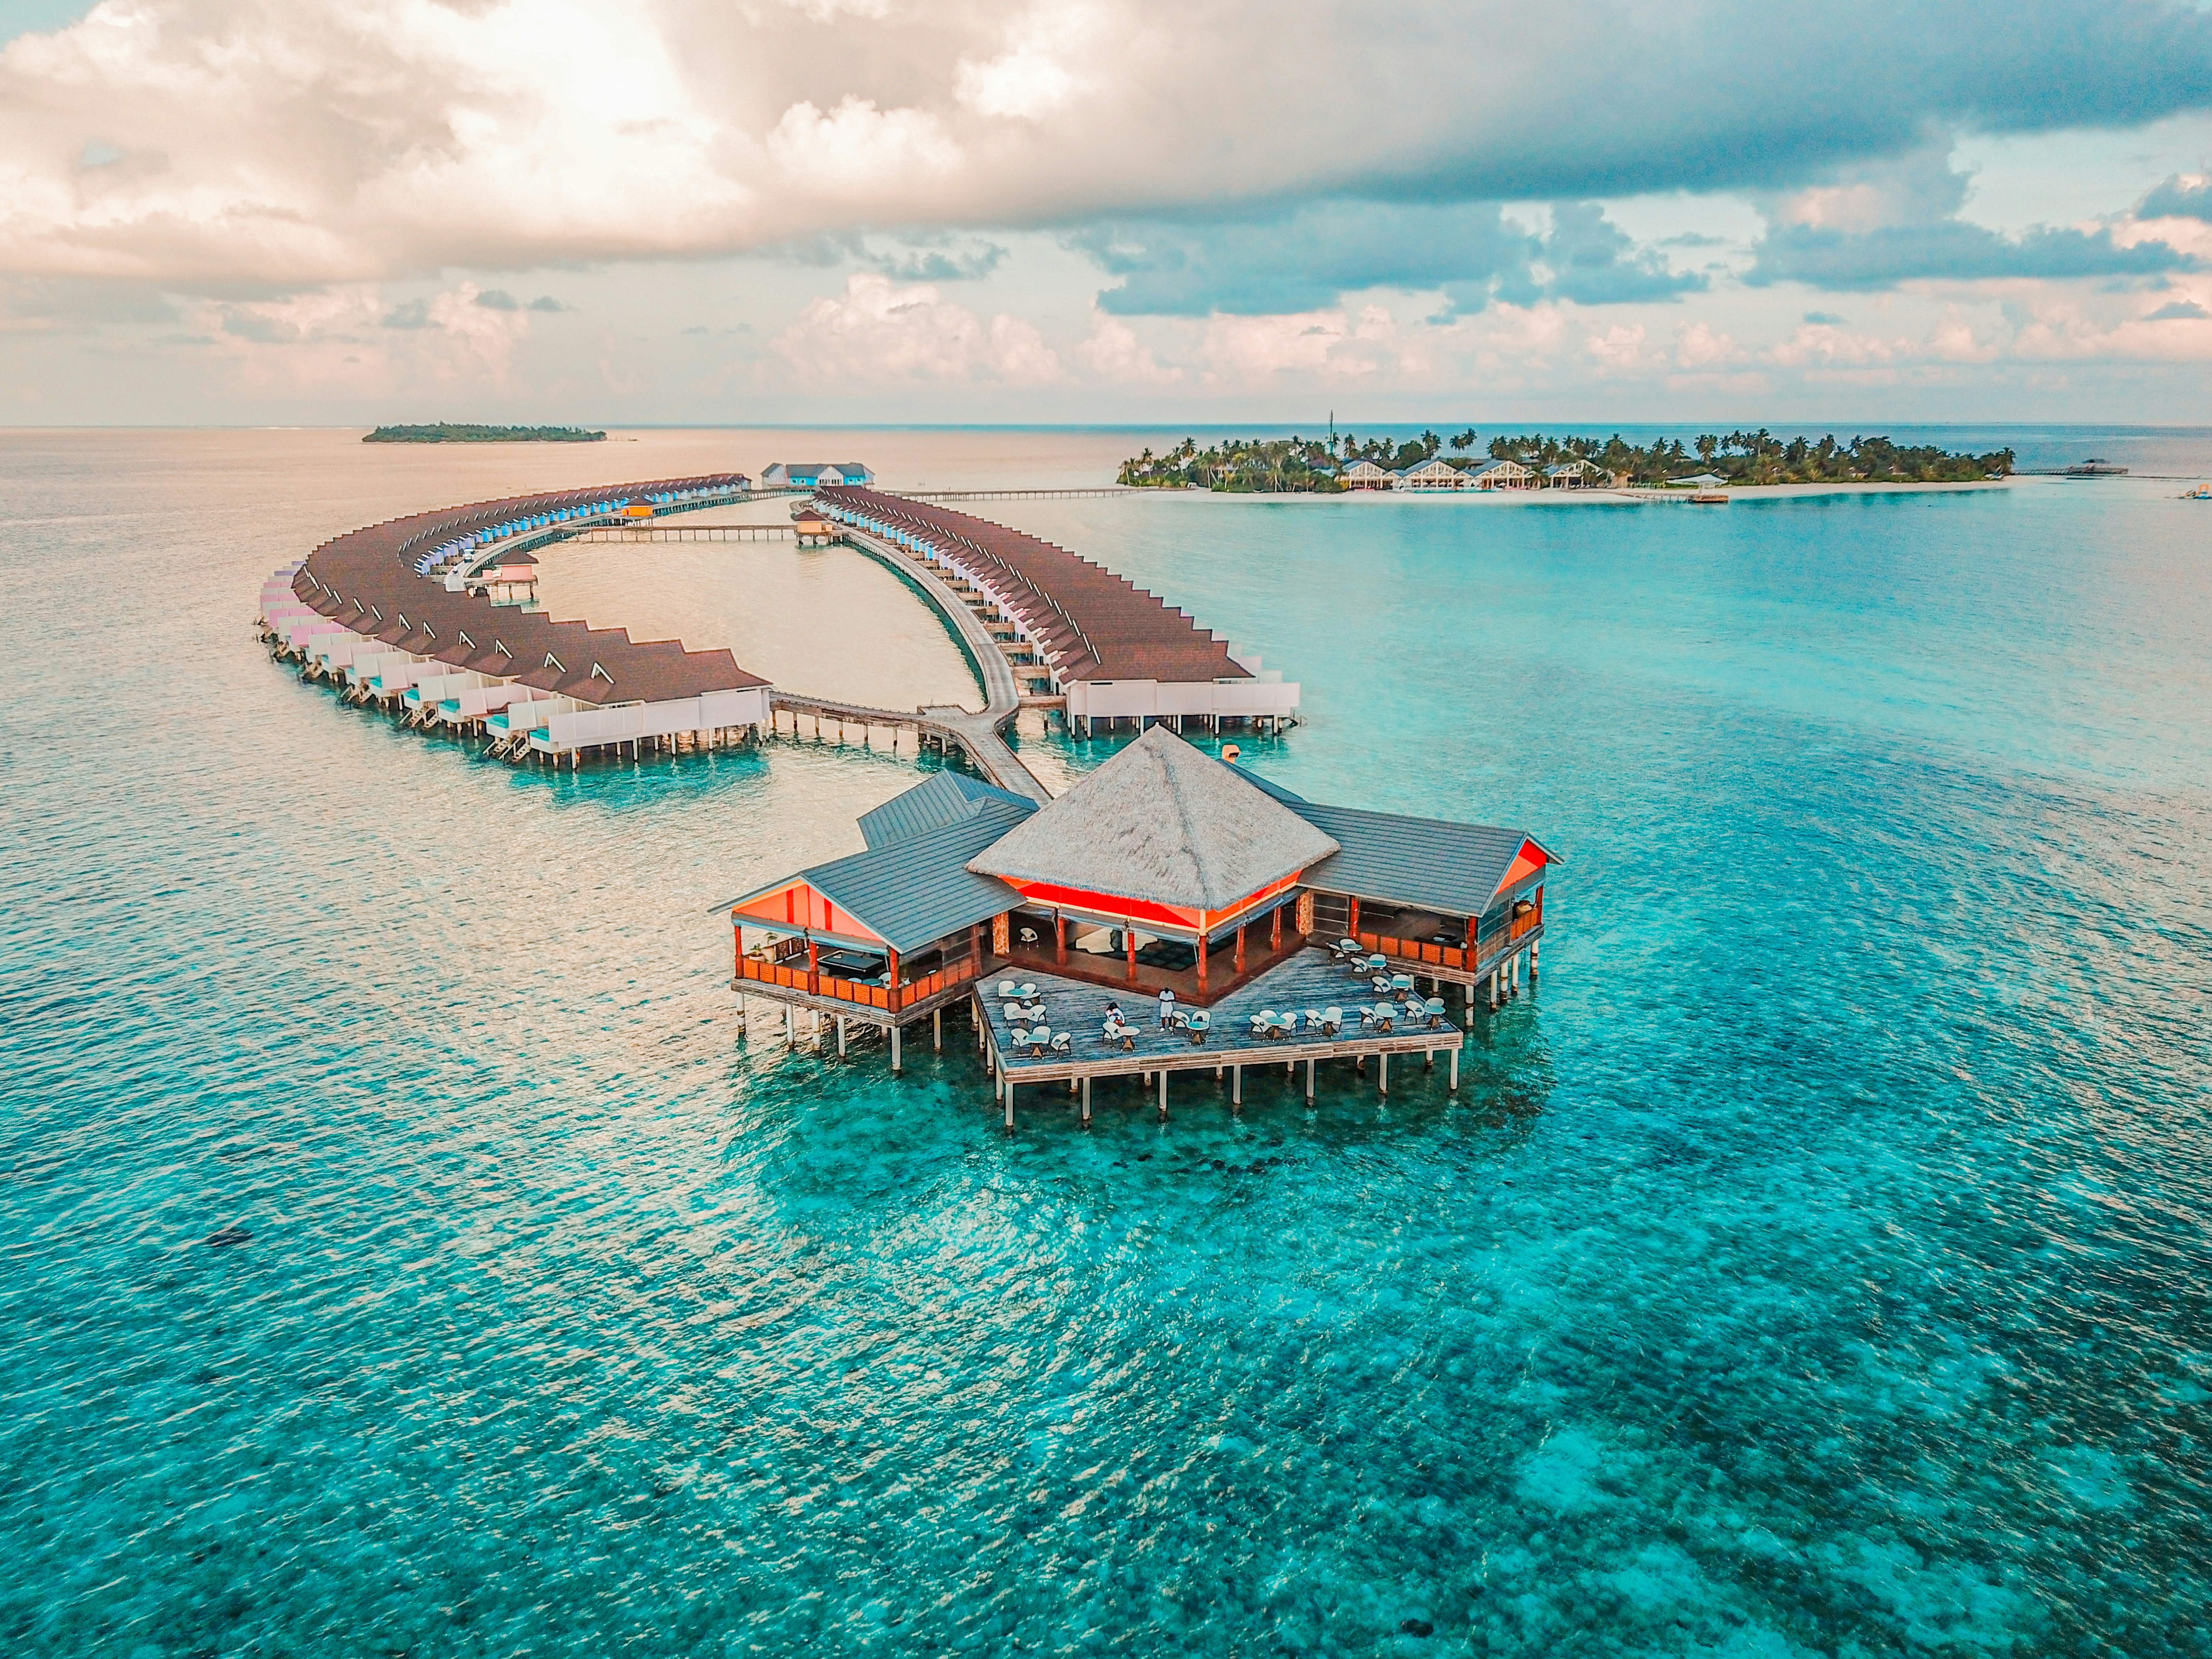 Follow the over water villas to Beru Bar - perfect for sunset cocktails and late night dancing on our glass over water dance floor 🍹🐟